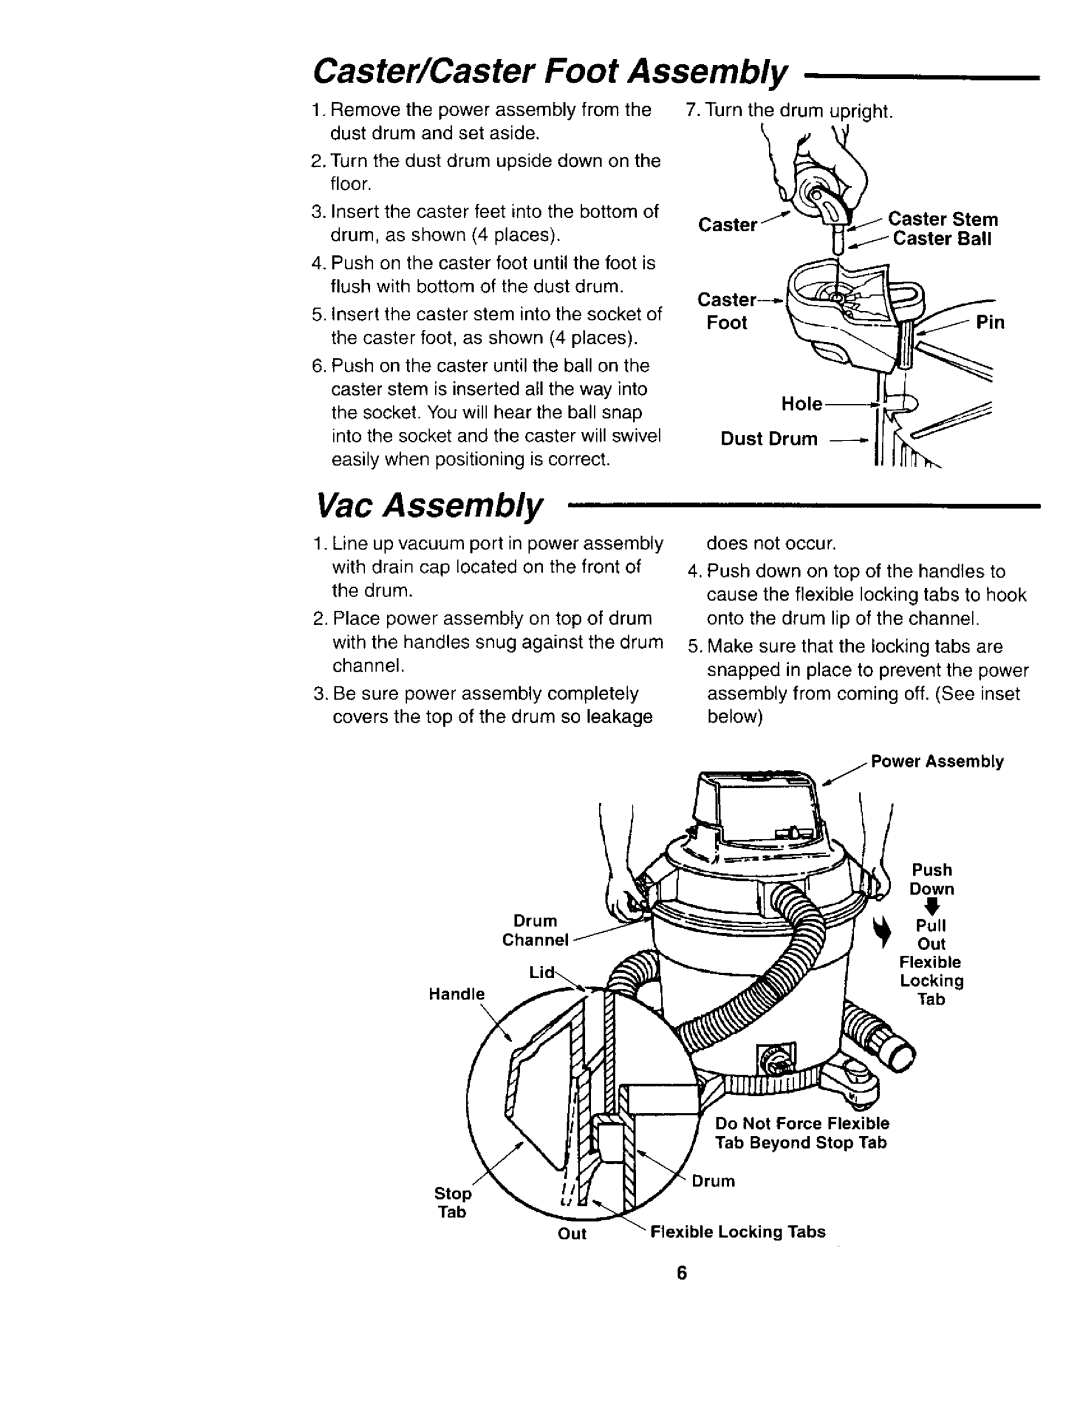 Sears 113.177035 owner manual Caster/Caster Foot Assembly, Vac Assembly, Caster Stem Ball Foot Dust Drum, Handle, Tab 